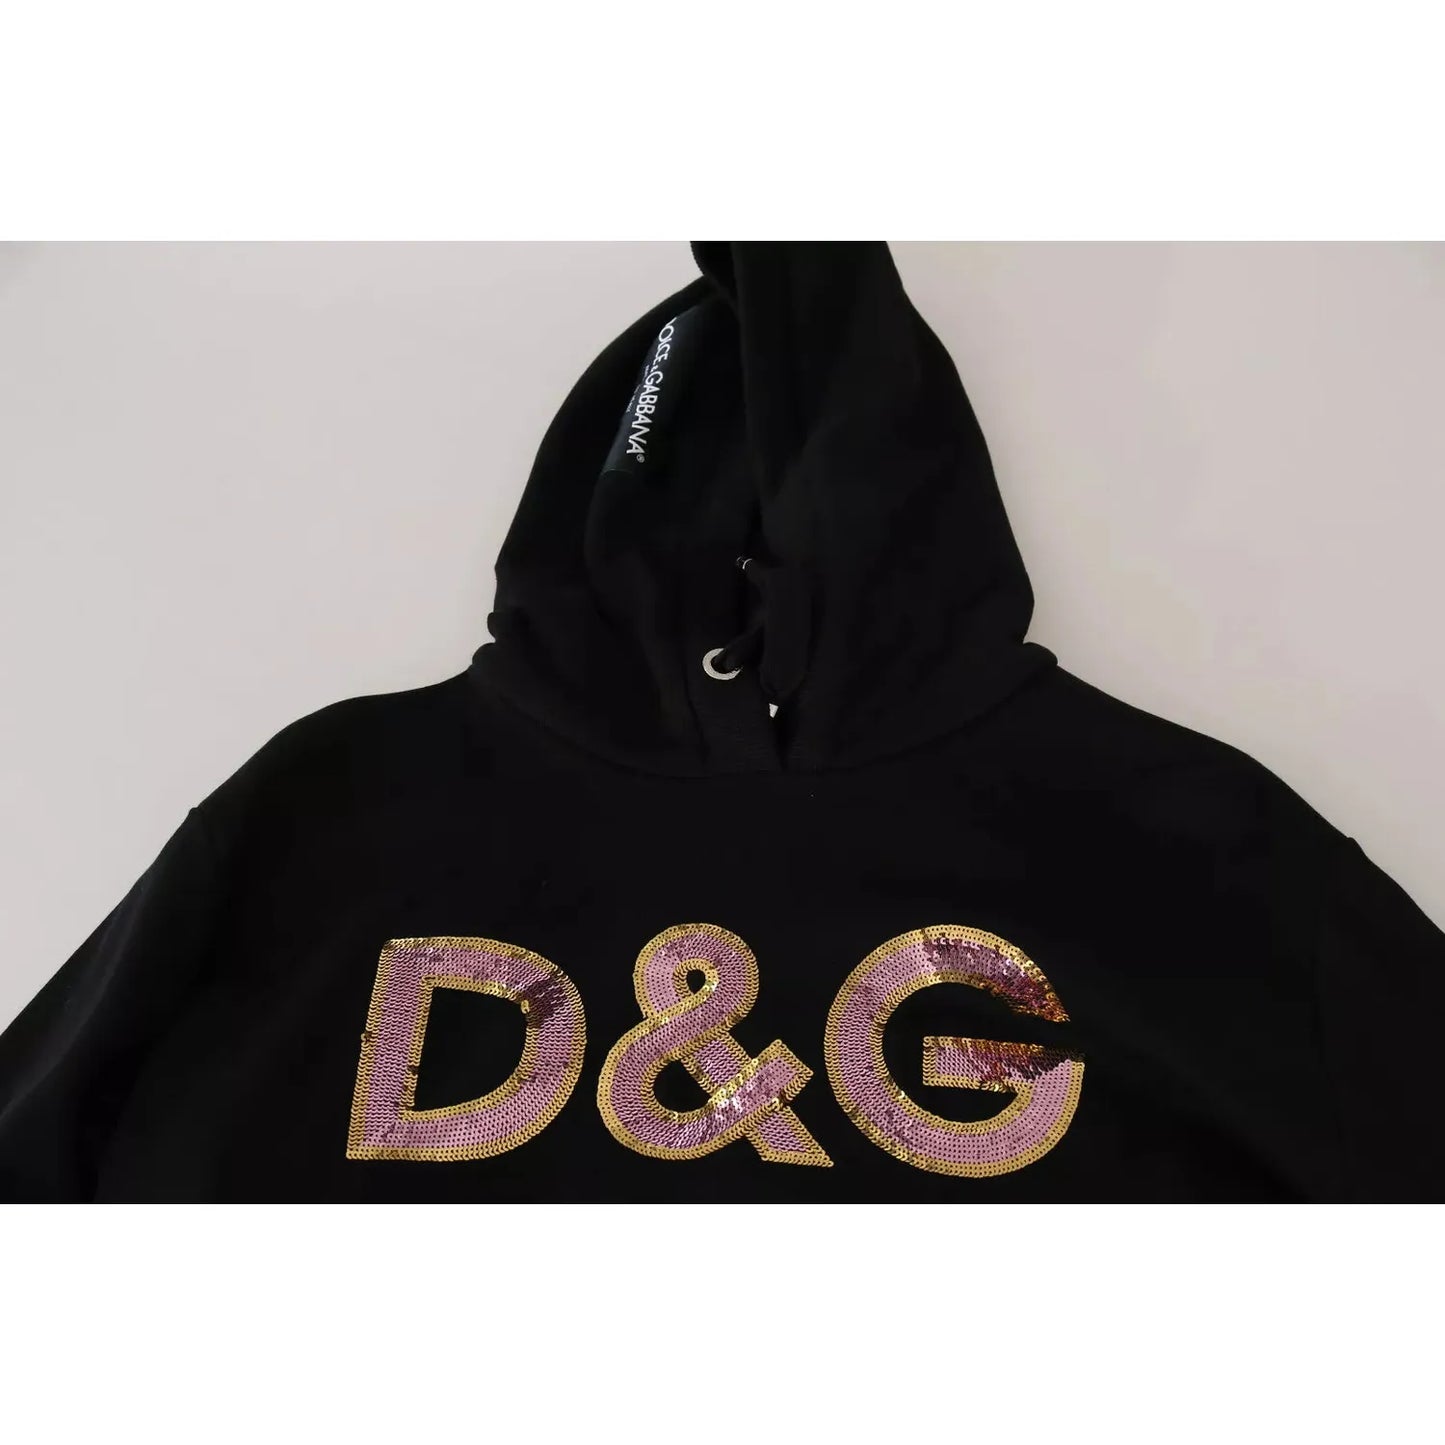 Dolce & Gabbana DG Sequined Hooded Pullover Sweater dg-sequined-hooded-pullover-sweater-4